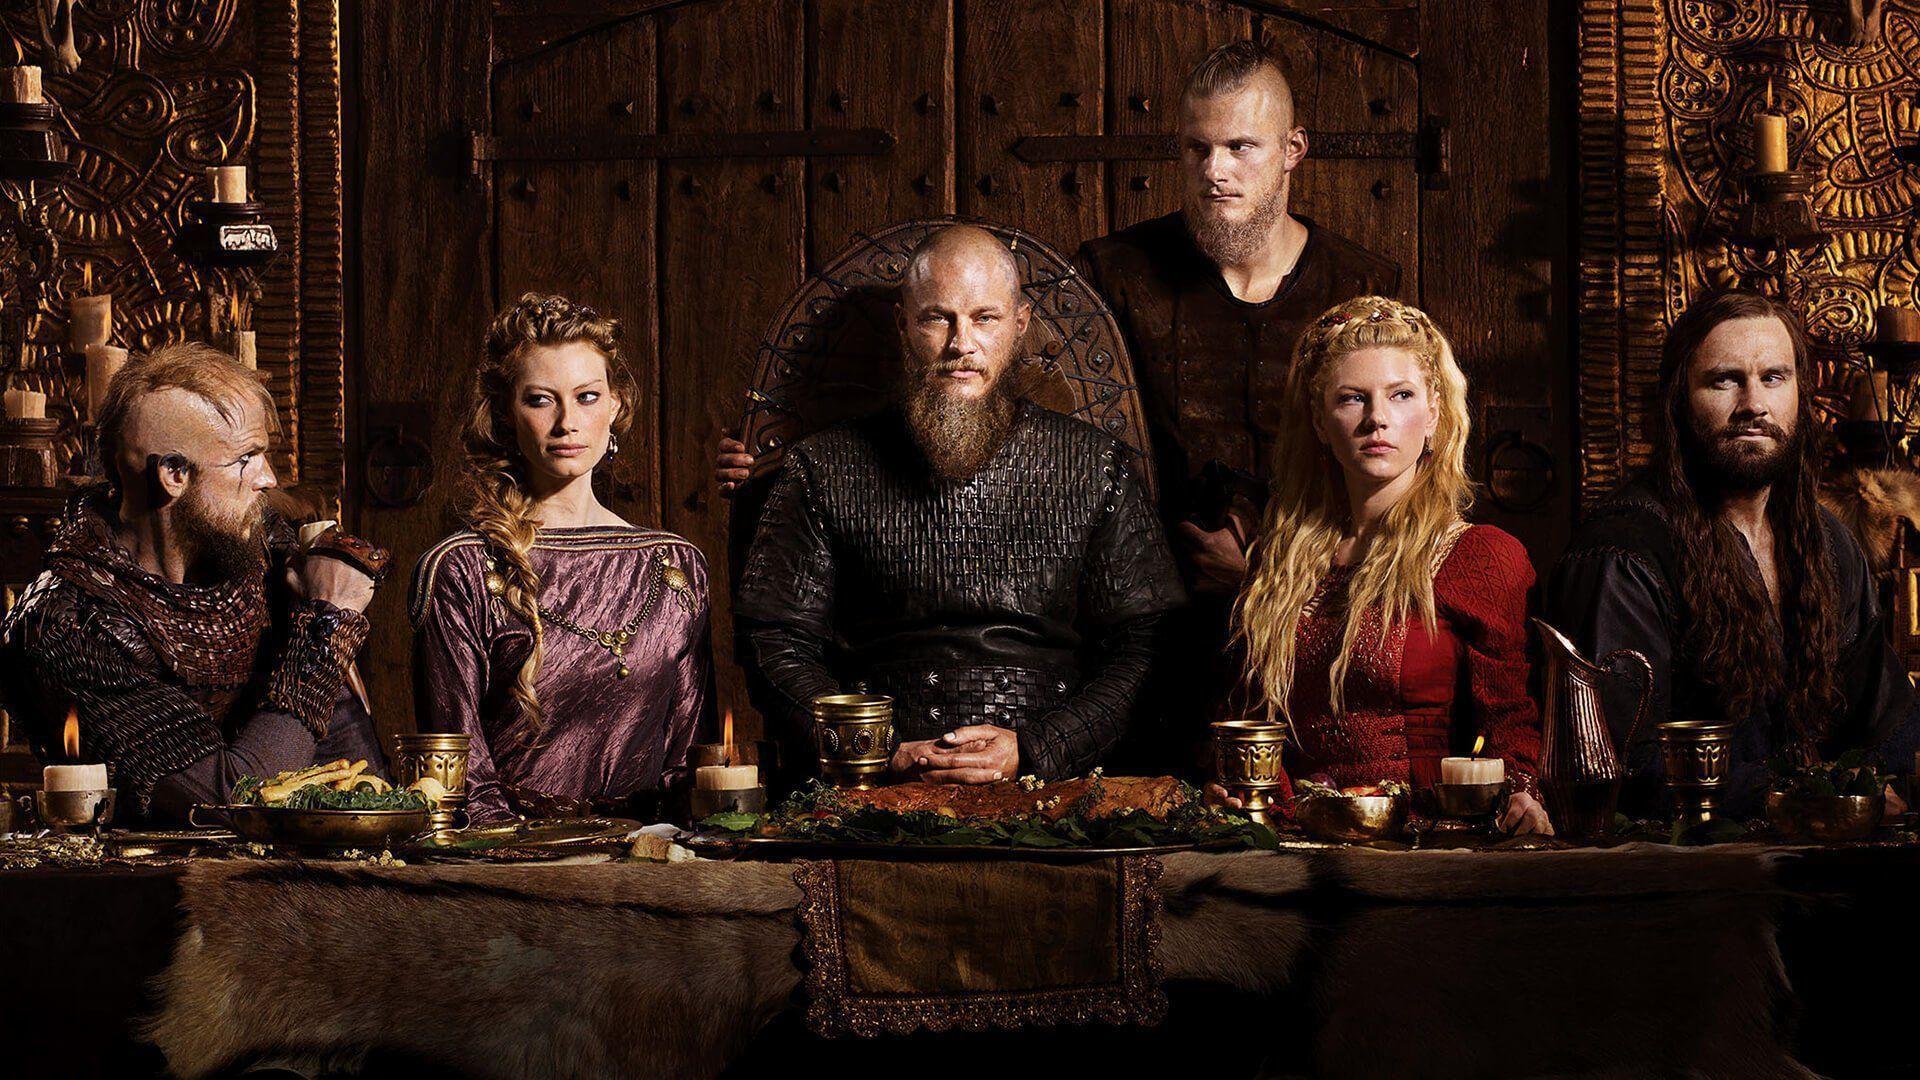 Bjorn, Ragnar, Lagertha and other. HD Image